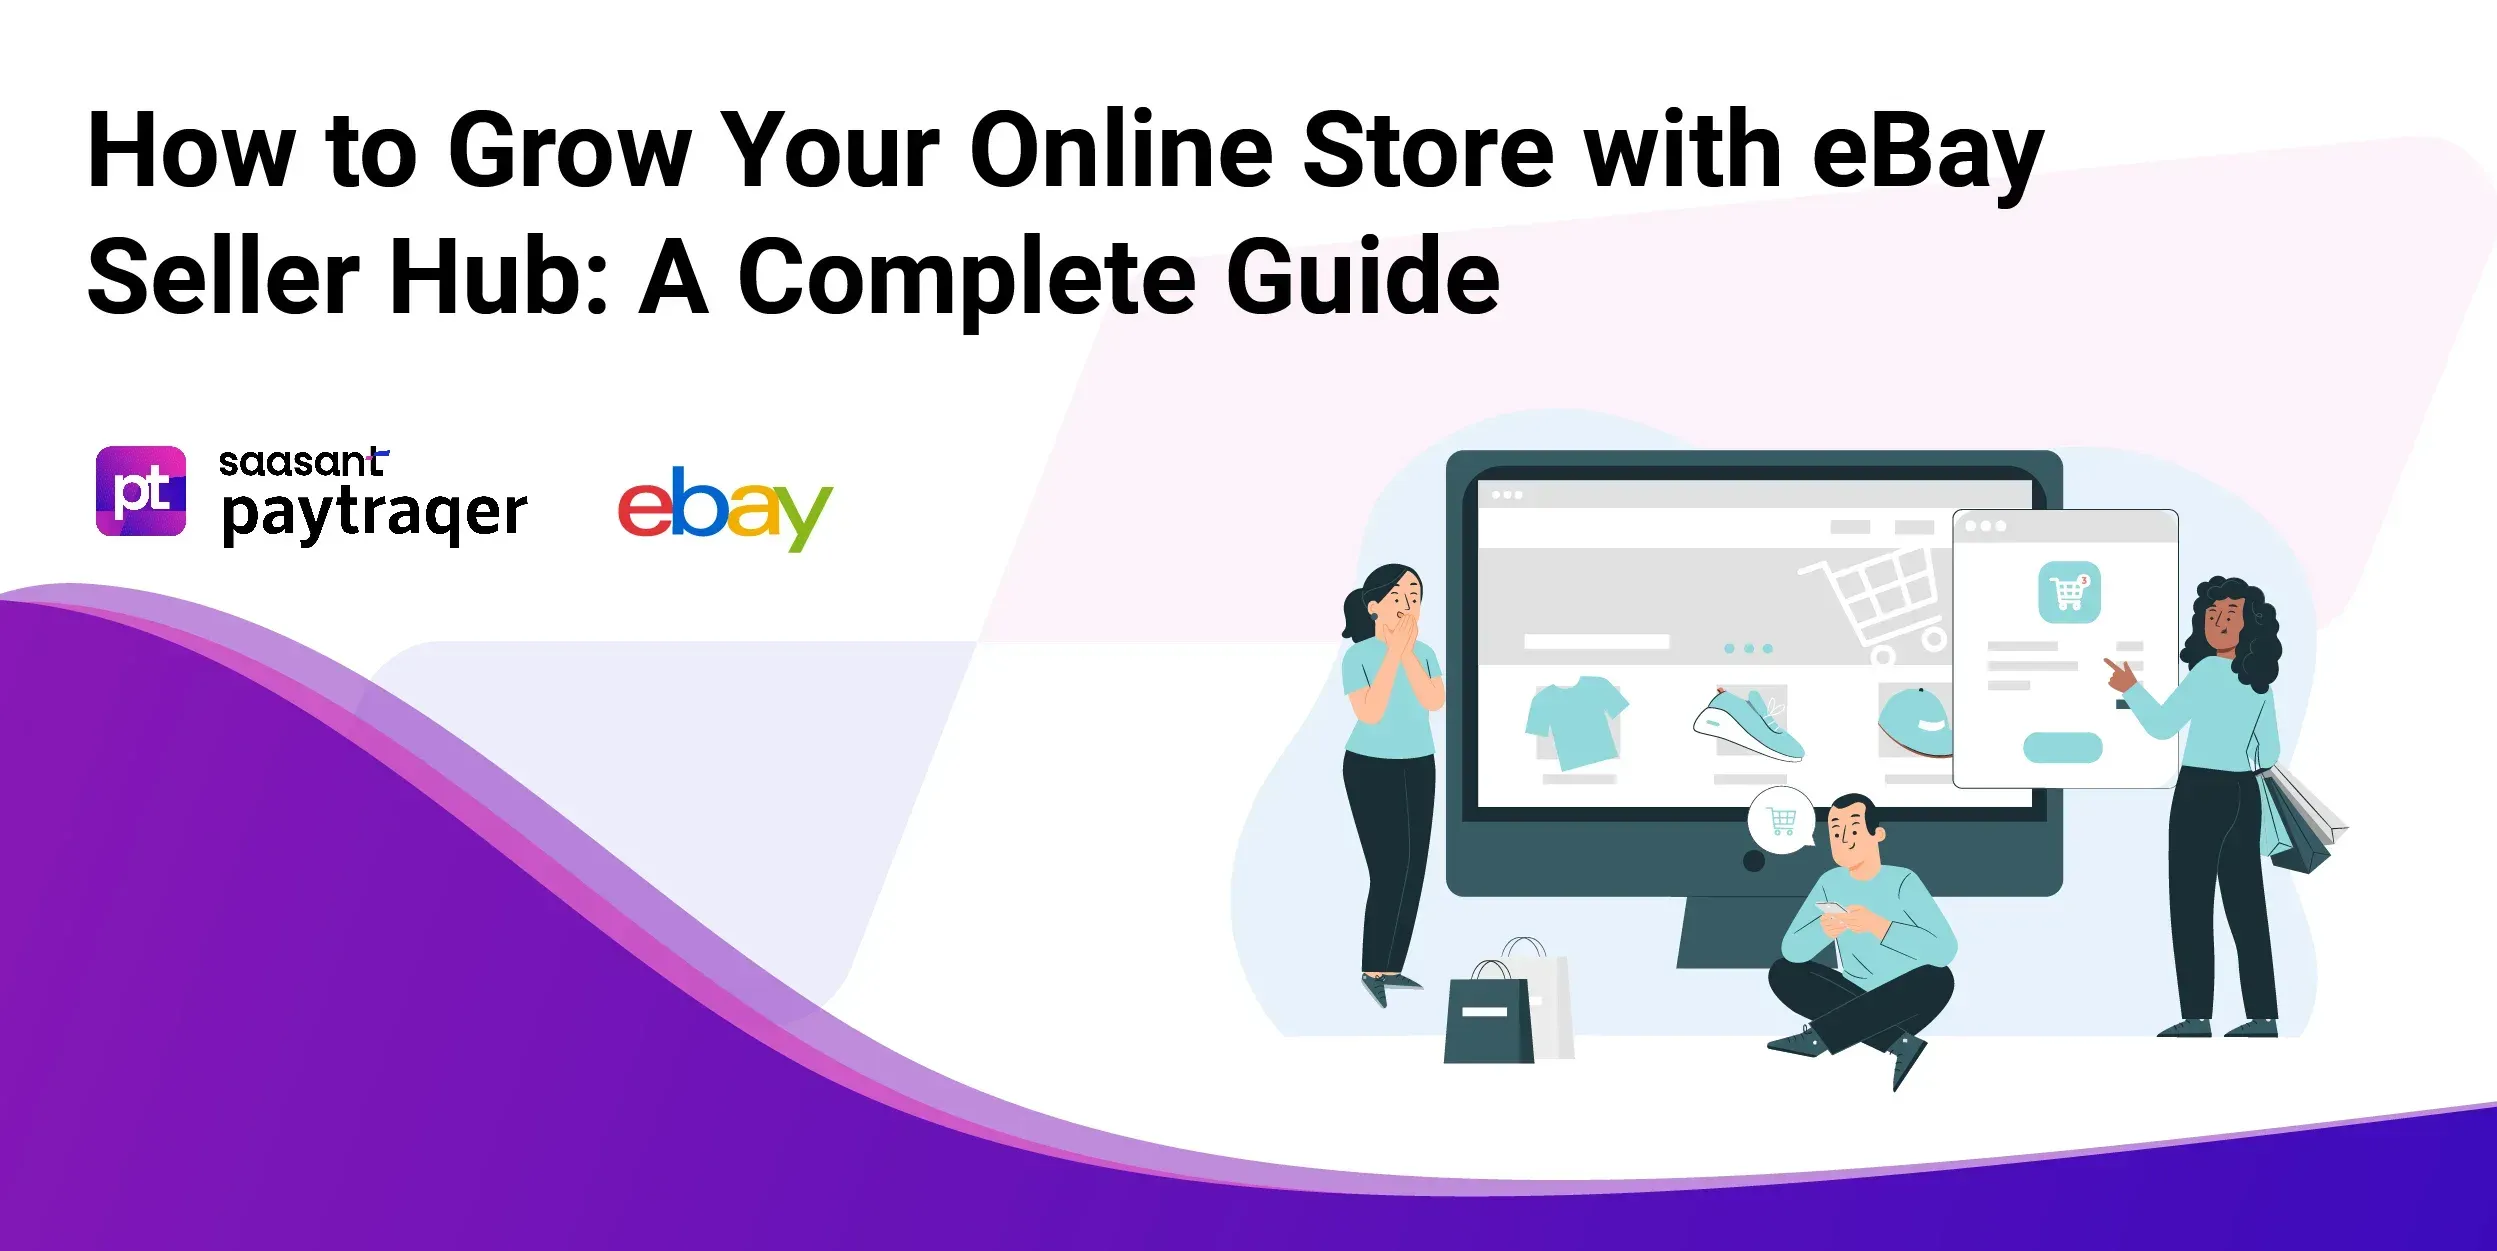 How to Grow Your Online Store with eBay Seller Hub - A Complete Guide